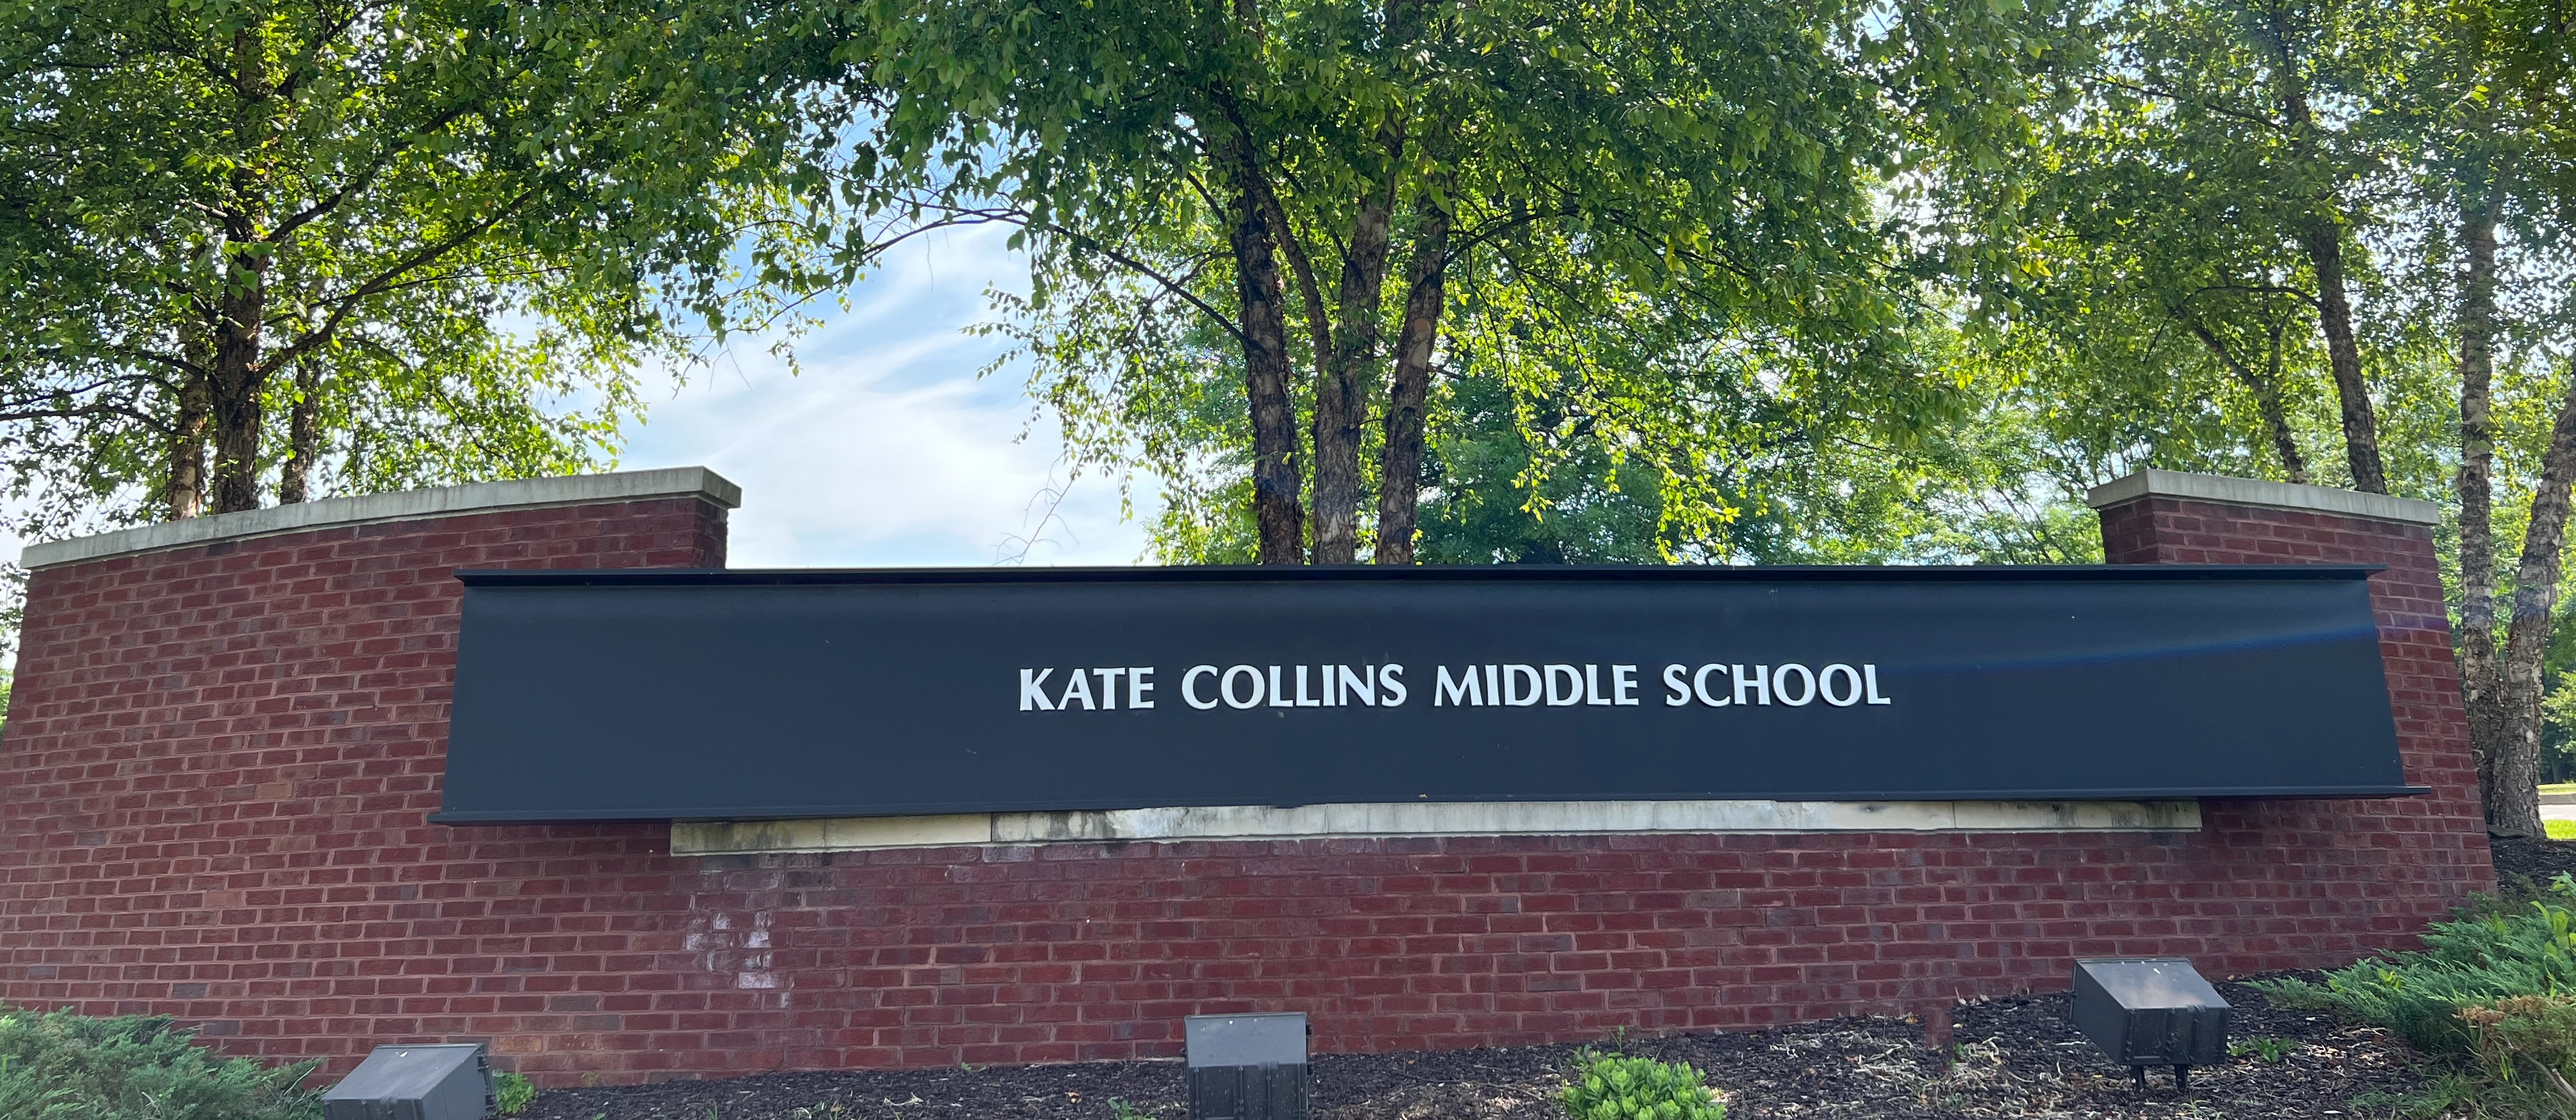 kcms marquee